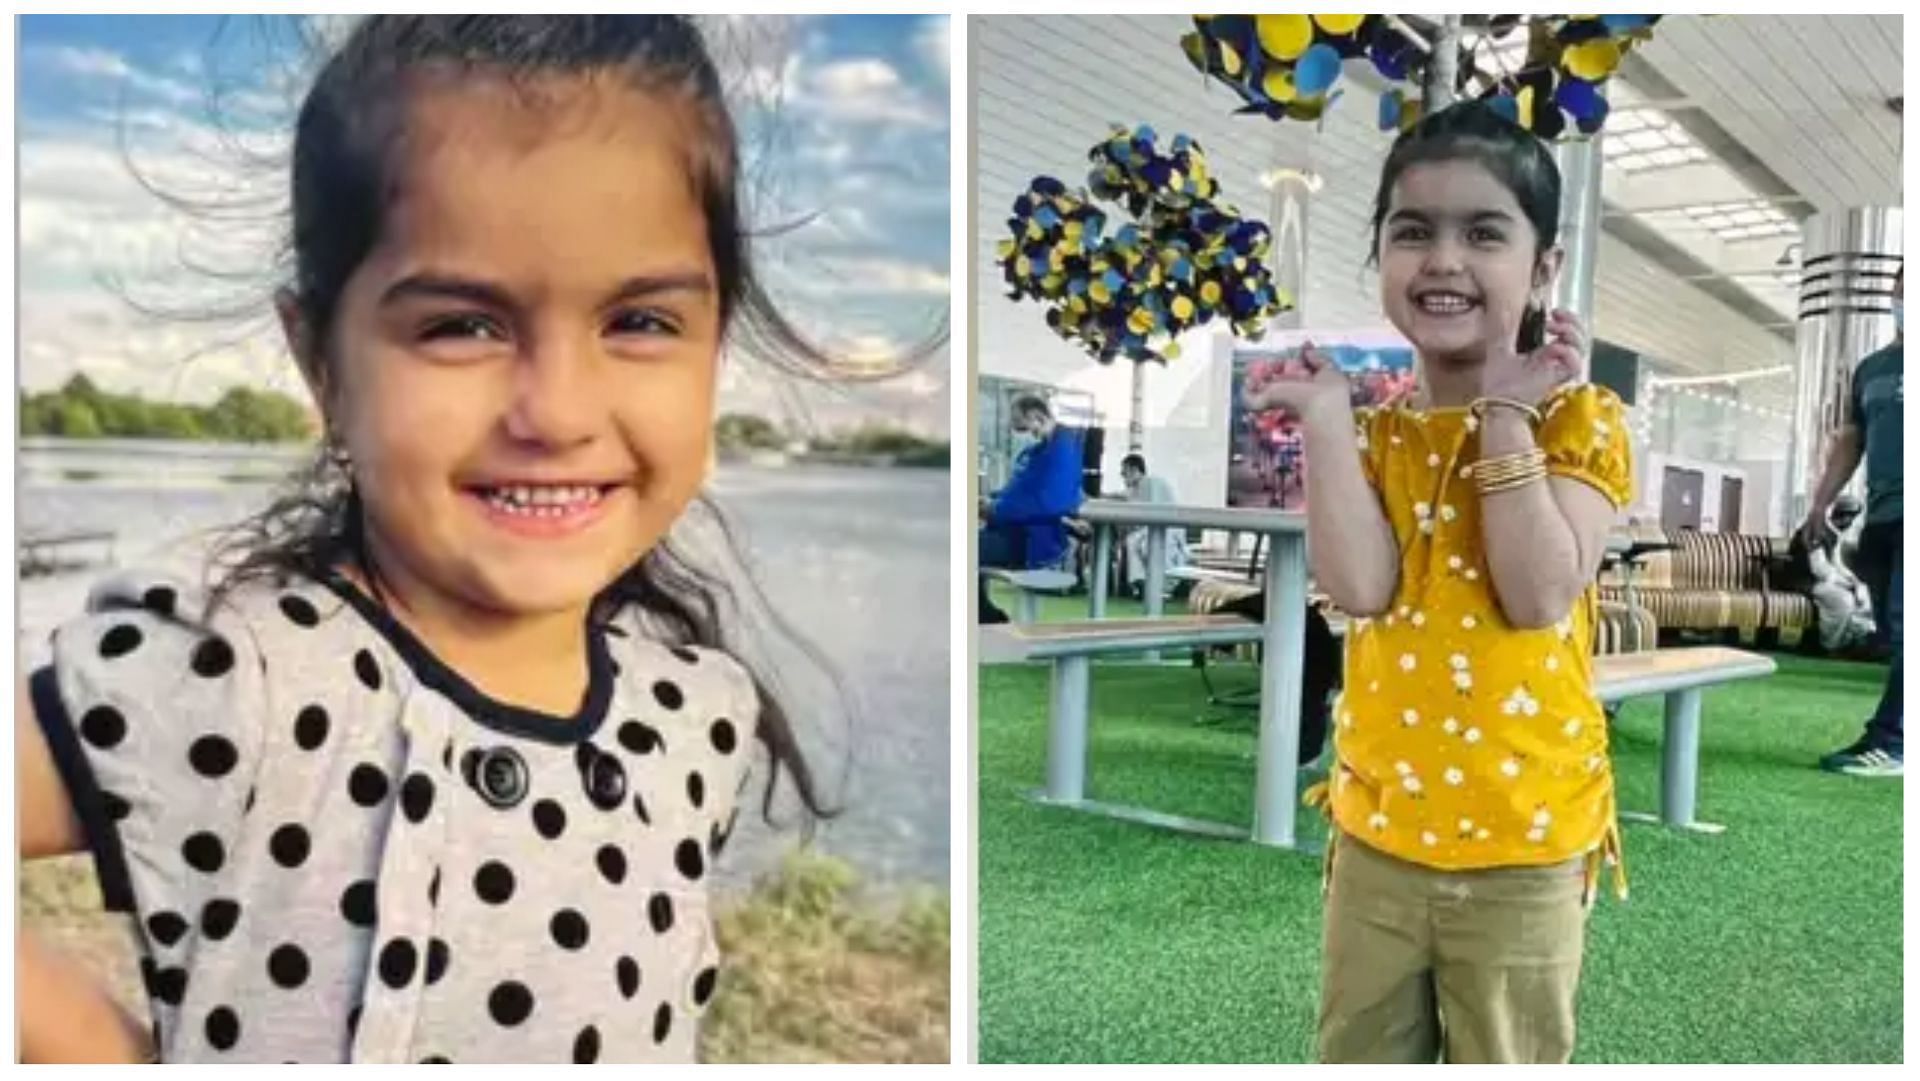 Lina Sardar Khil disappeared in December, 2022 while playing at a playground in her Texas apartment complex, (Image via San Antonio Police Department)